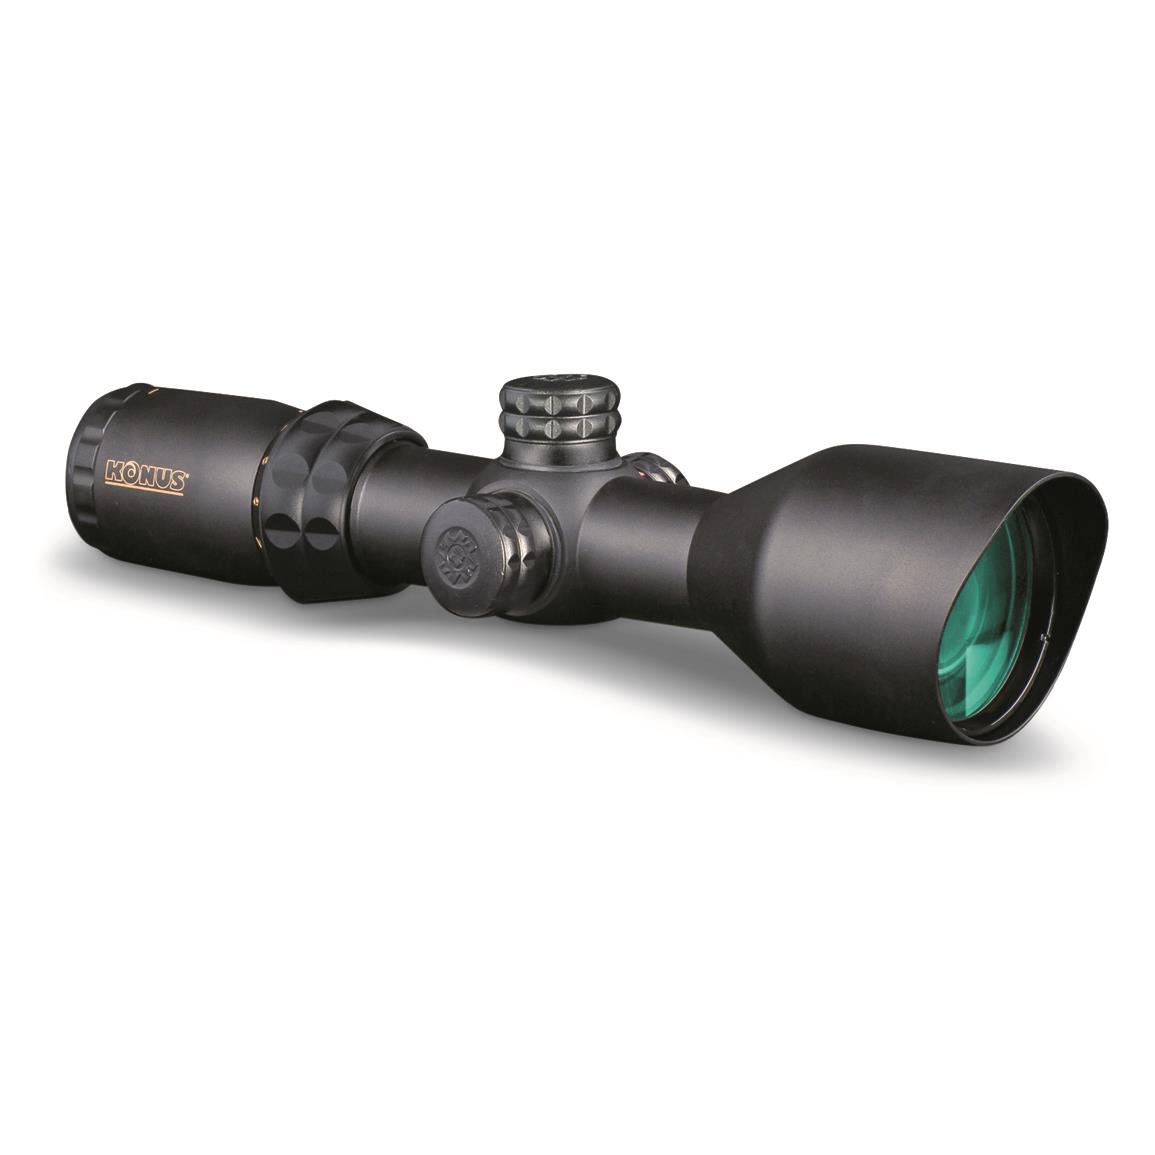 KONUSPRO T-30 3-12x50mm Tactical Rifle Scope, SFP Illuminated Blue/Red Mil-Dot Reticle